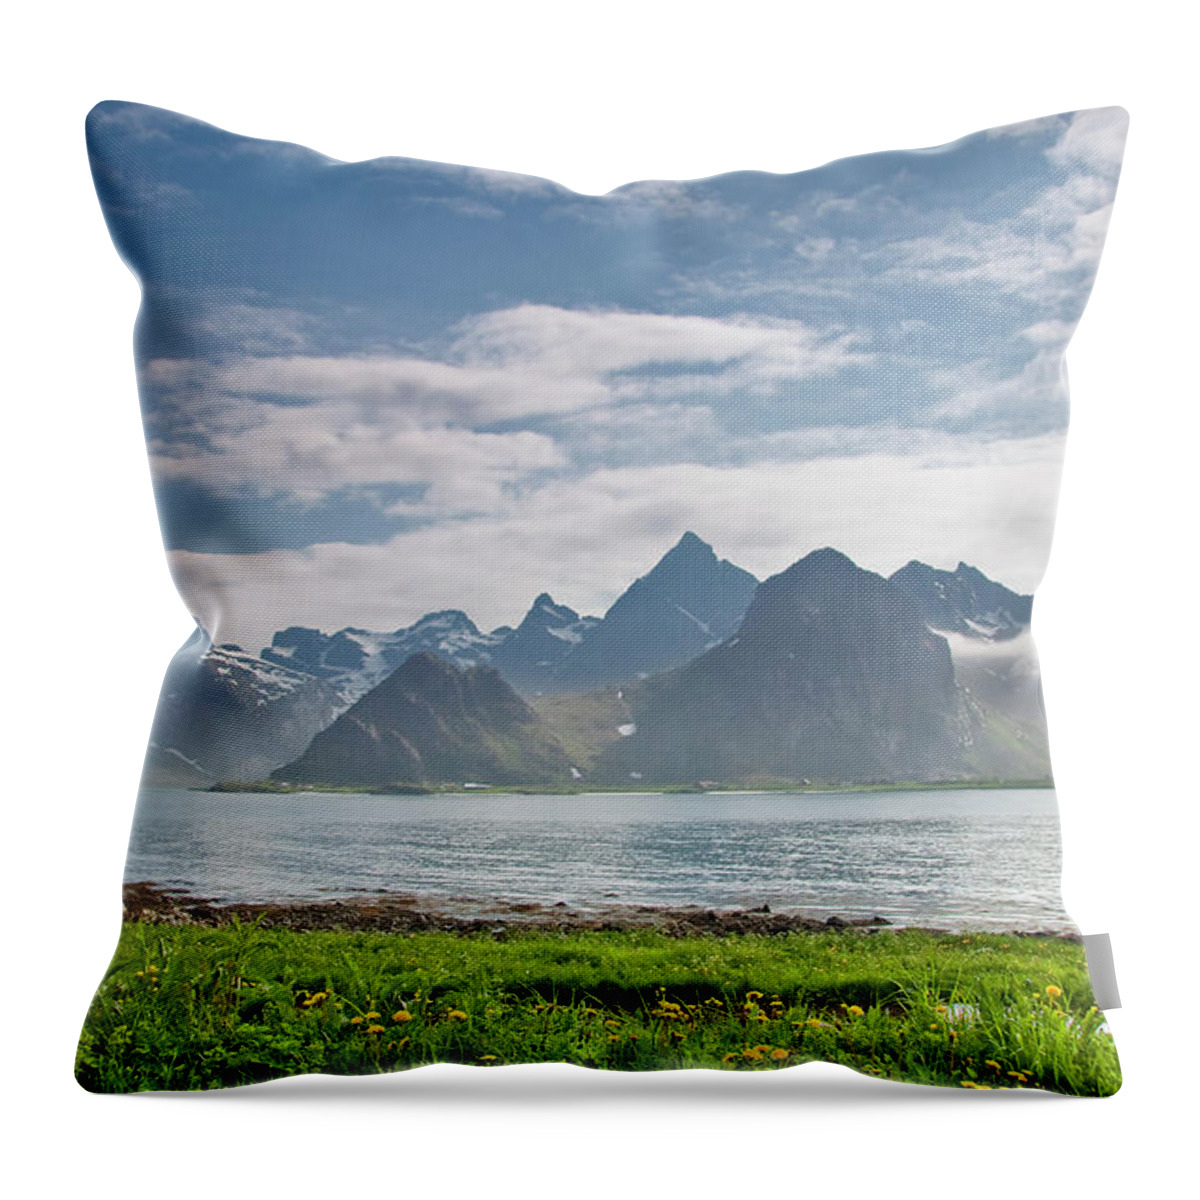 Scenics Throw Pillow featuring the photograph Mighty Mountains Of Lofoten Islands by Harri Jarvelainen Photography